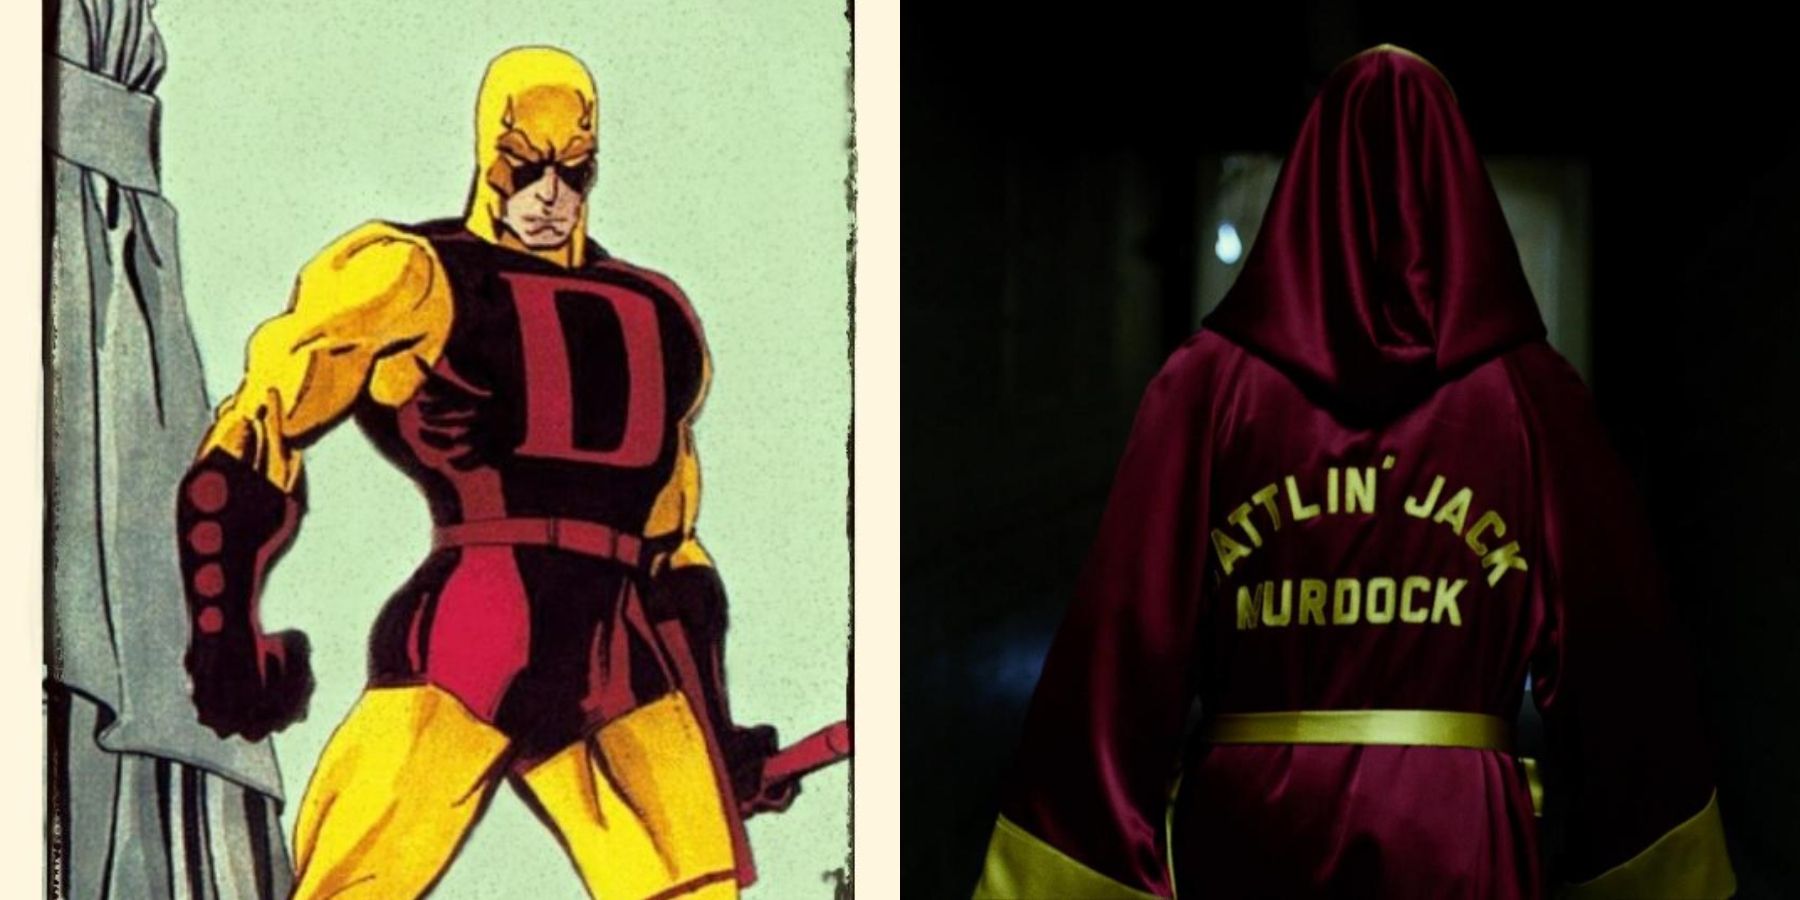 Daredevil Yellow and the boxing robes of Jack Murdock